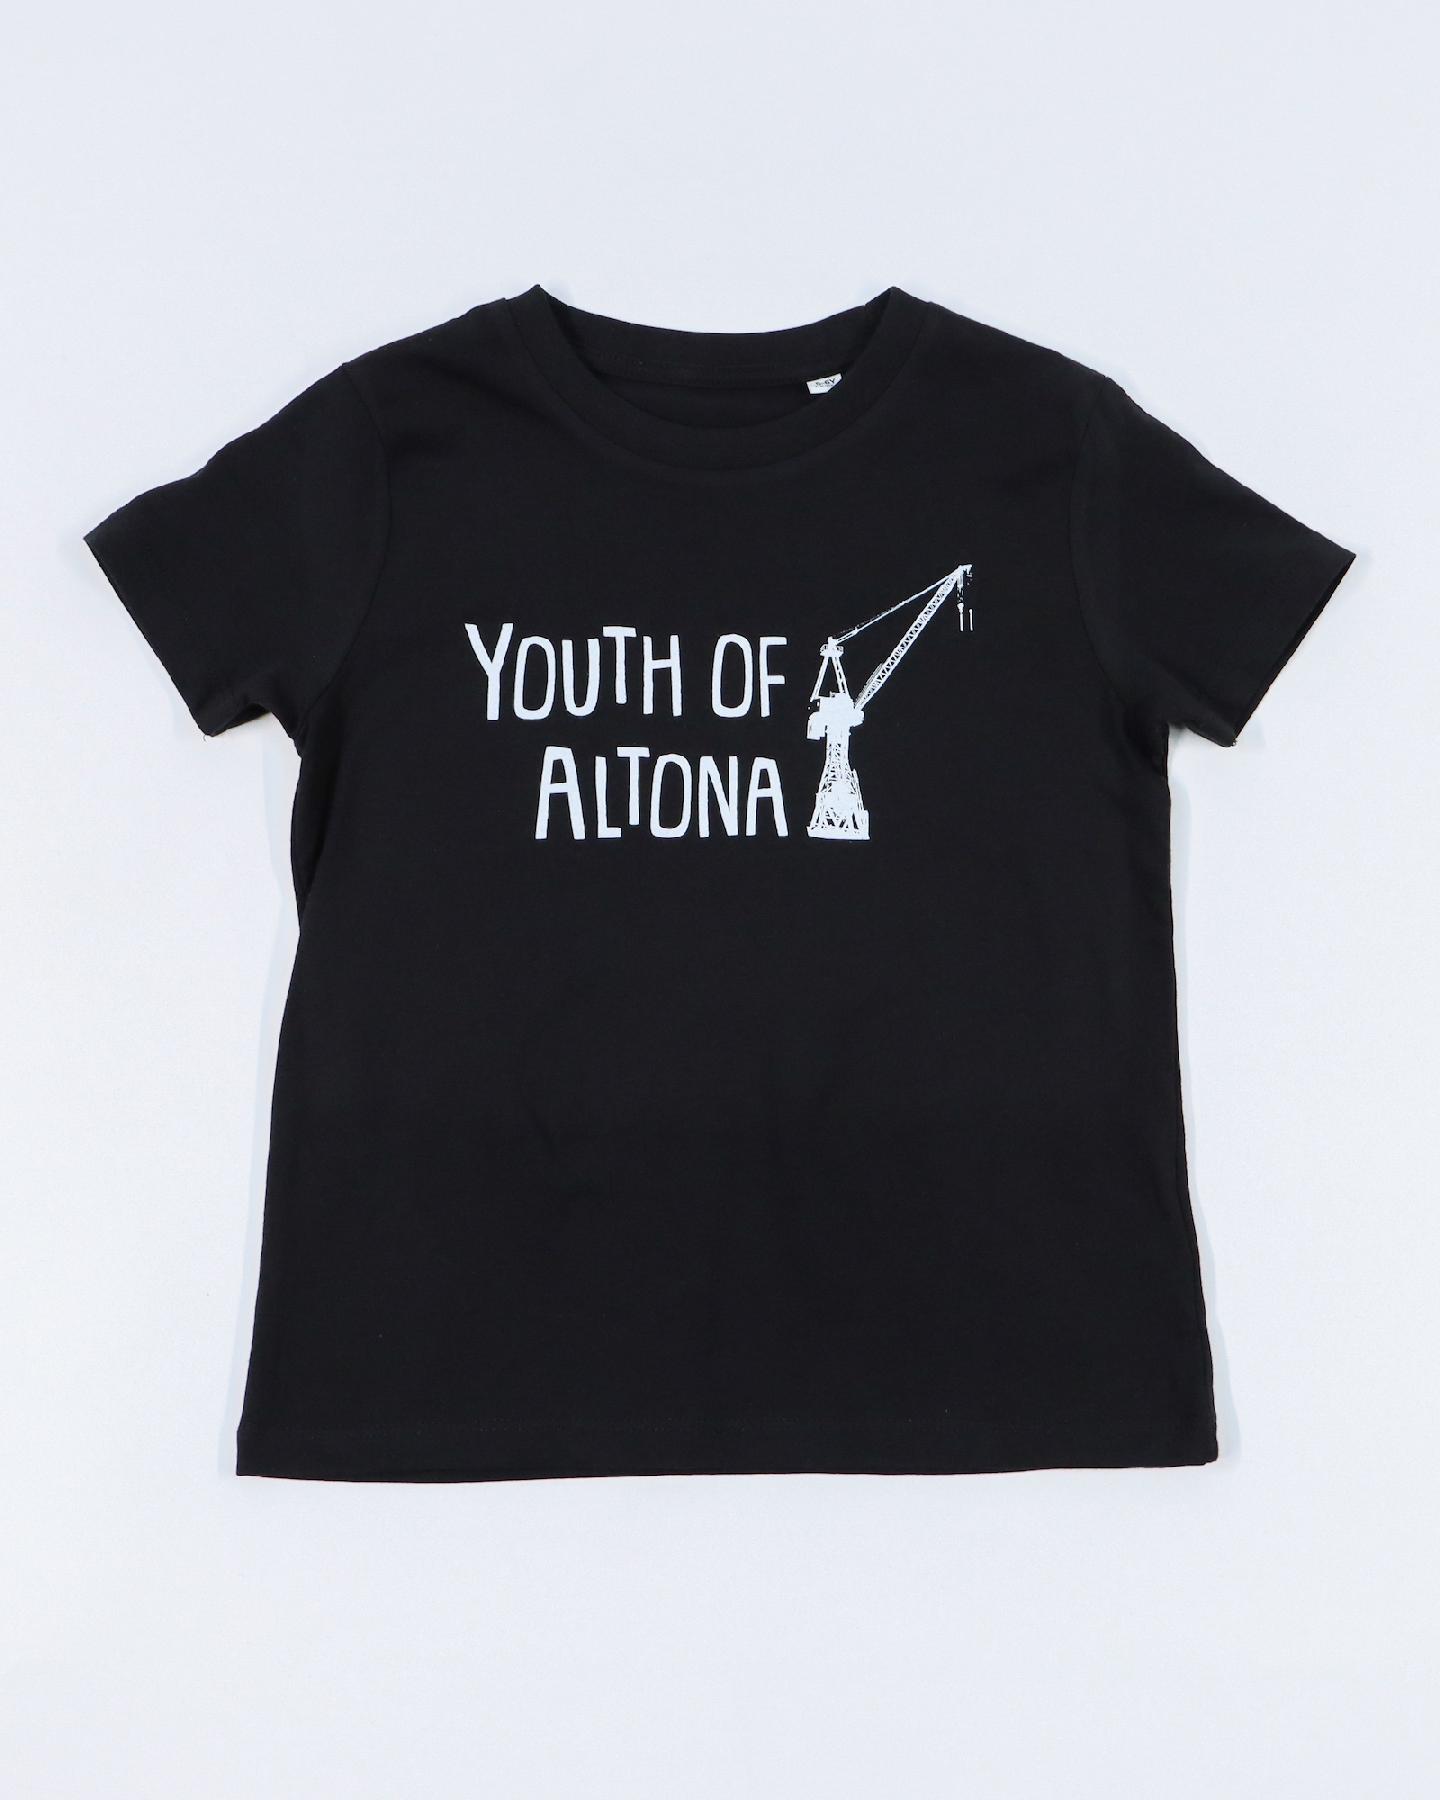 Youth Of Altona Rebel with a cause Kids T-Shirt